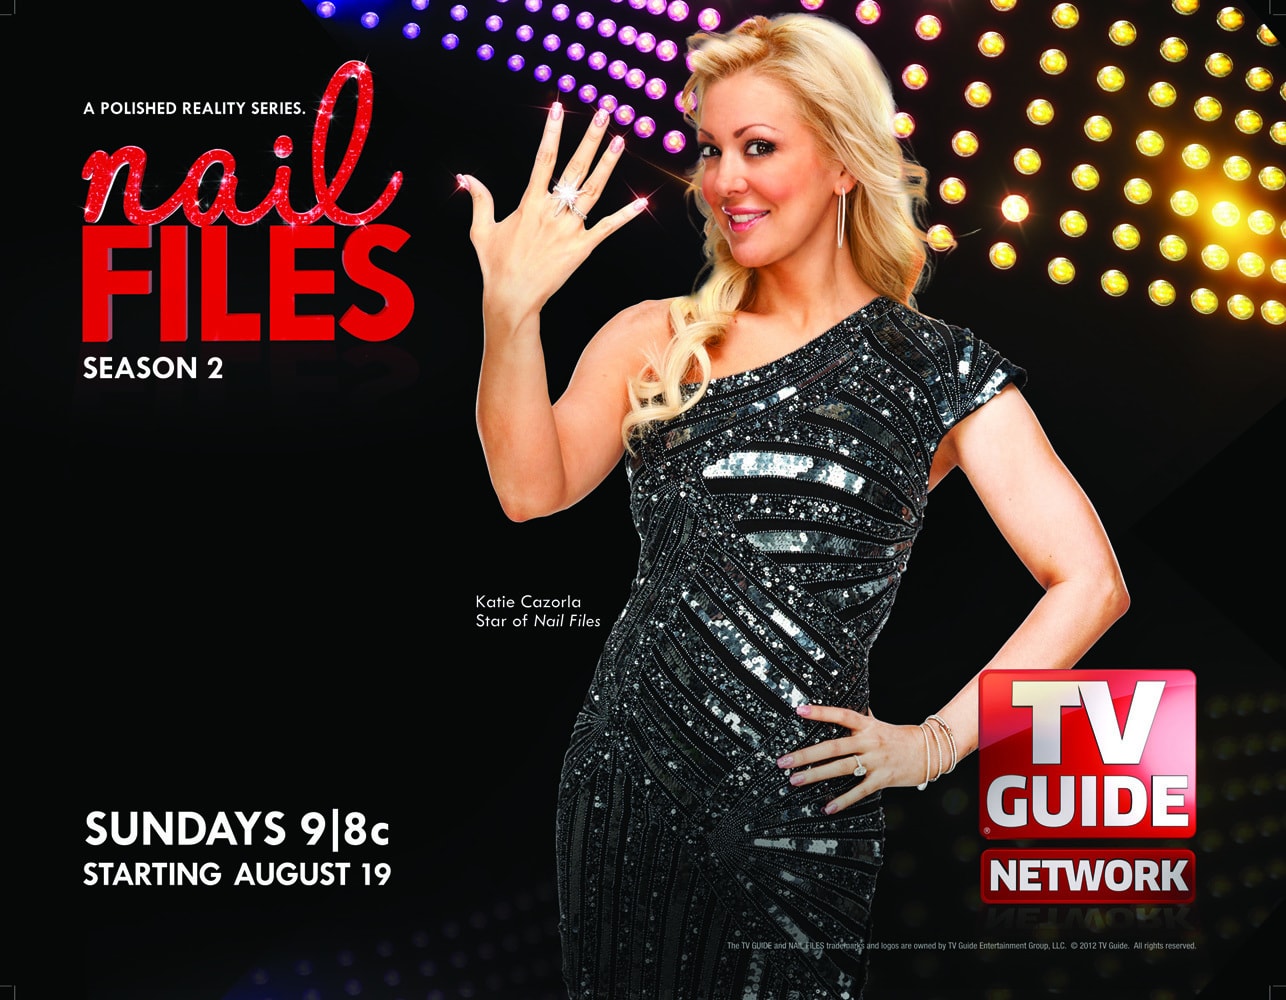 If you are a fan of TV Guide Network's new show, Nail Files”, then you will